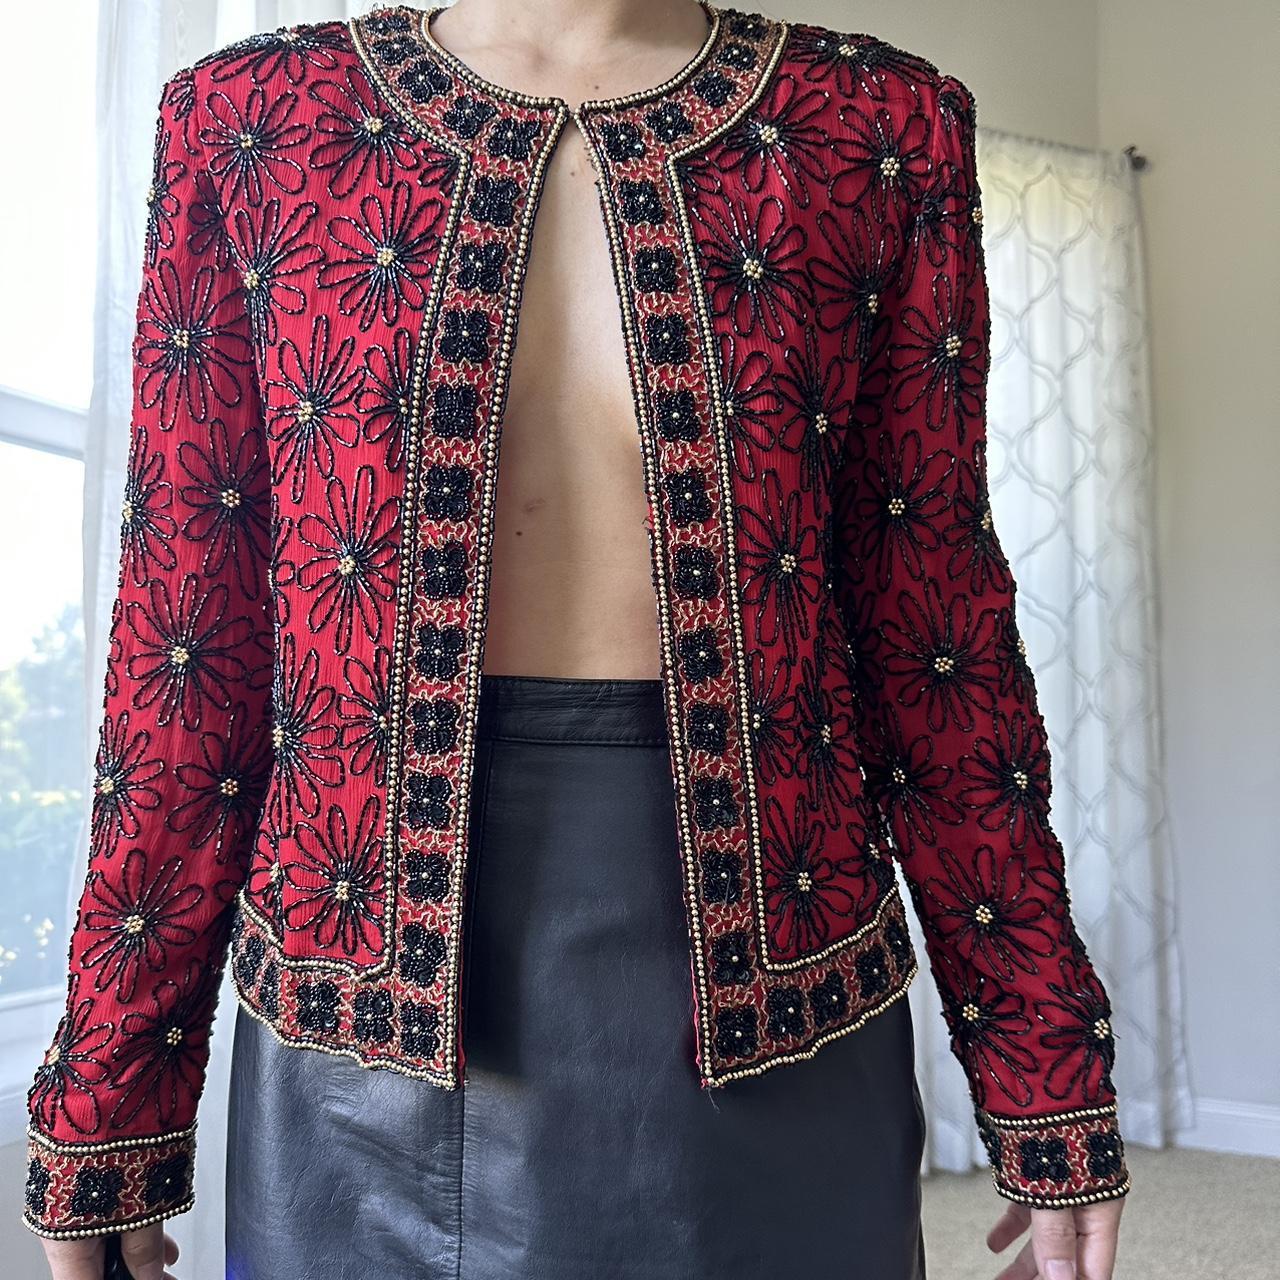 Women's Red and Black Blouse